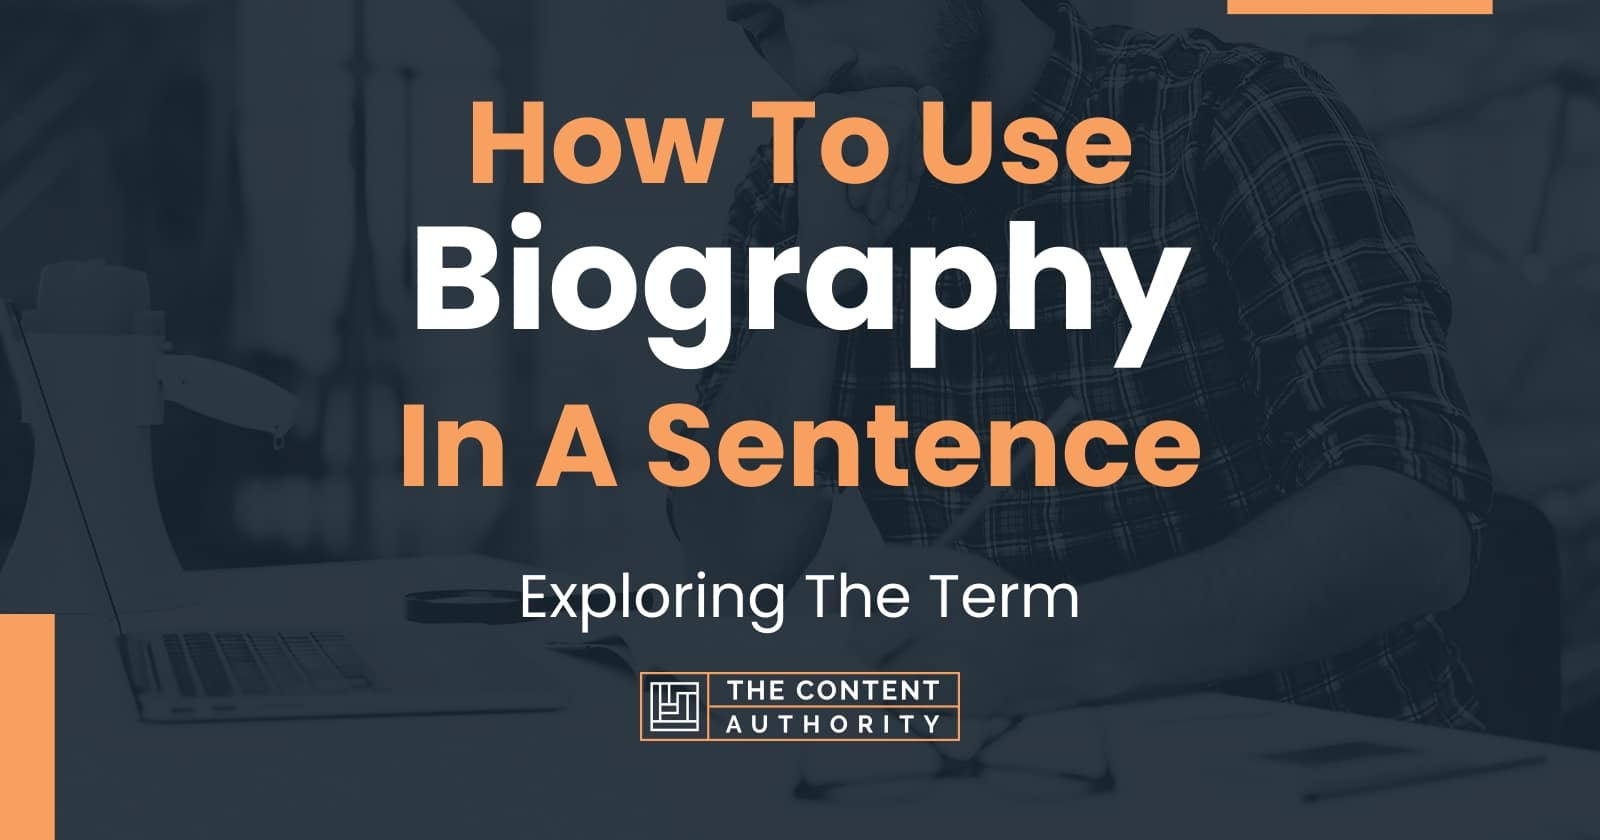 give the sentence of biography